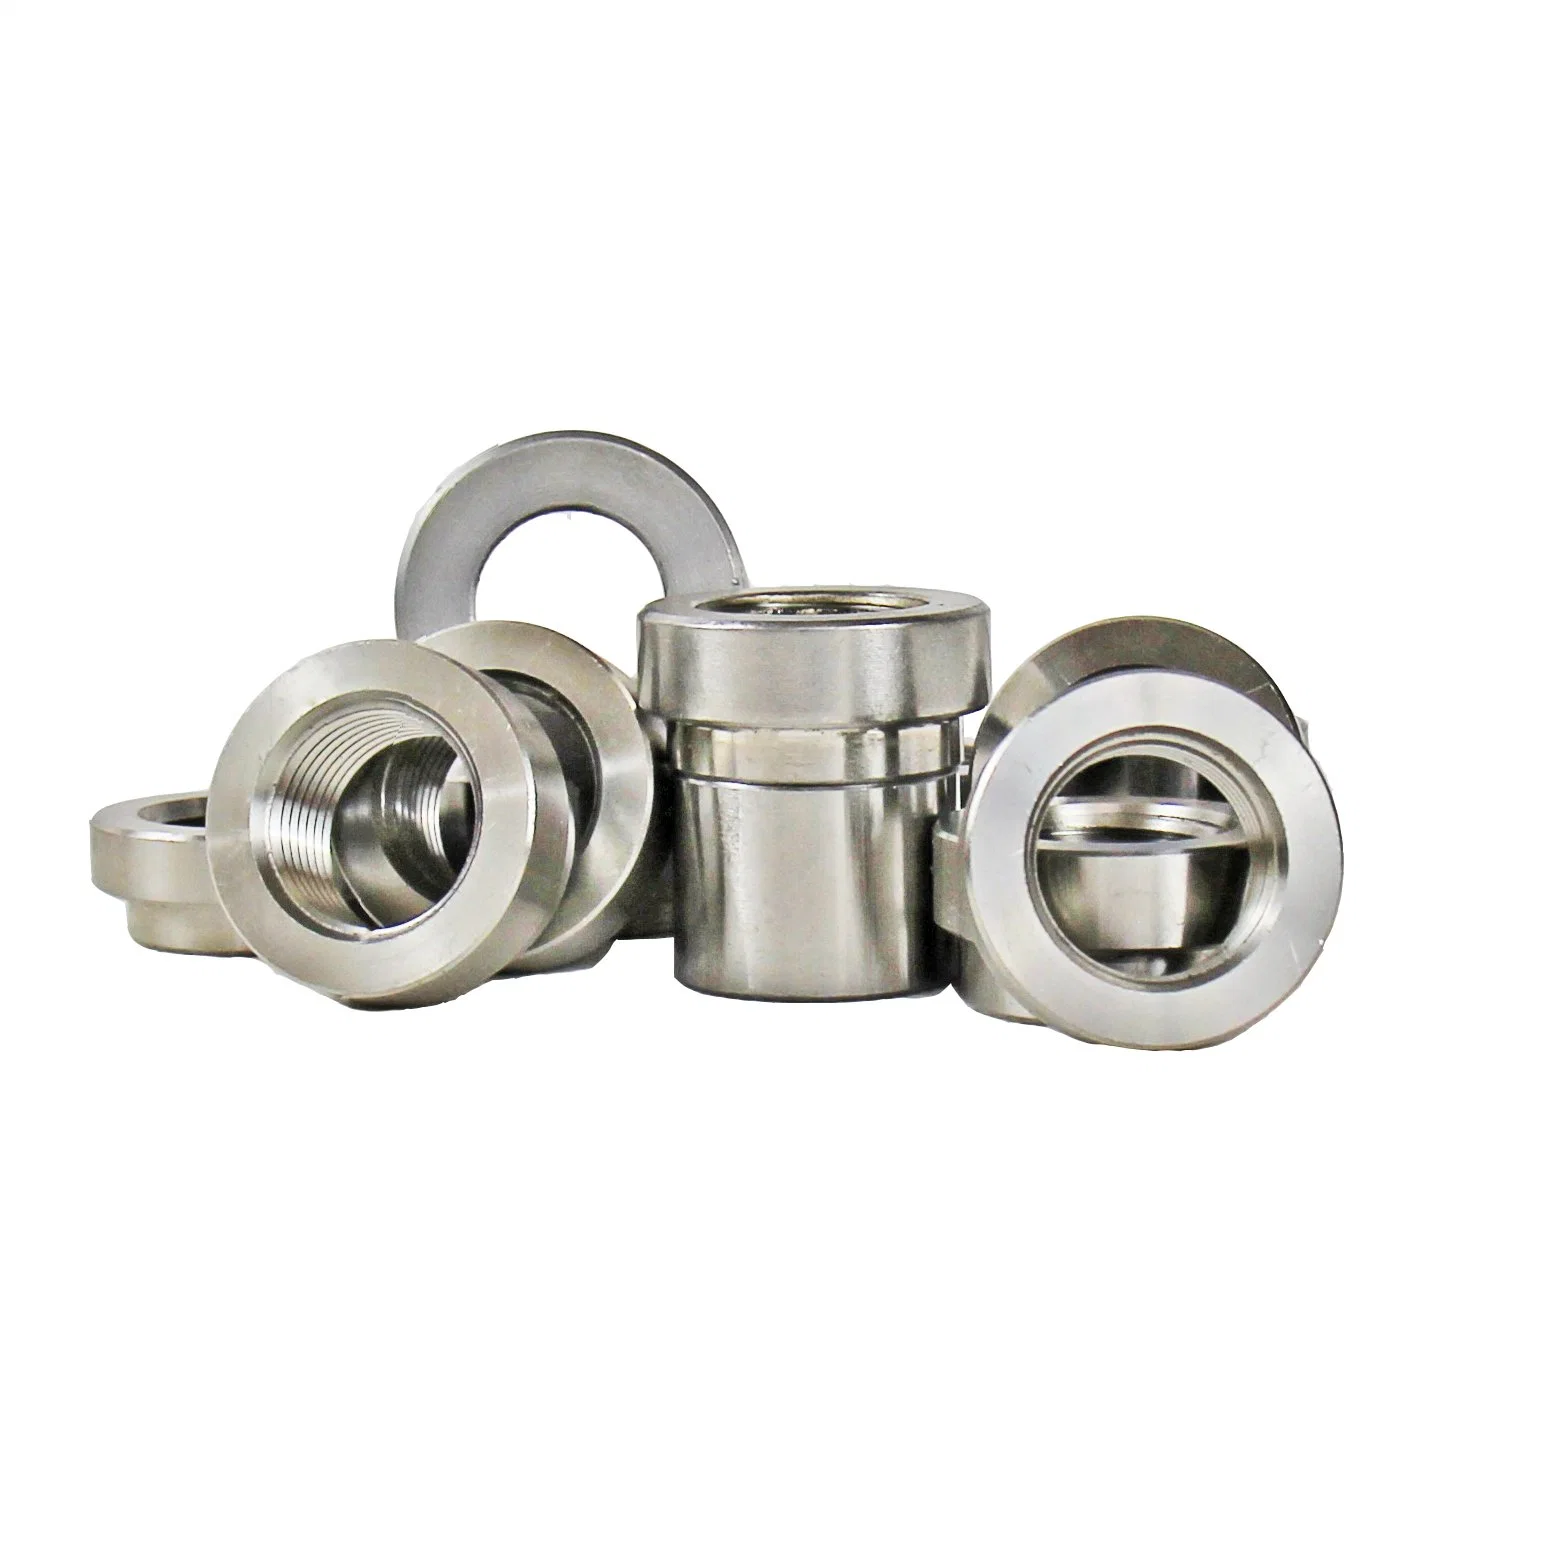 High Performance Exhaust System Accessories Q235 / S304 Stainless Steel Oxygen Sensor Nut